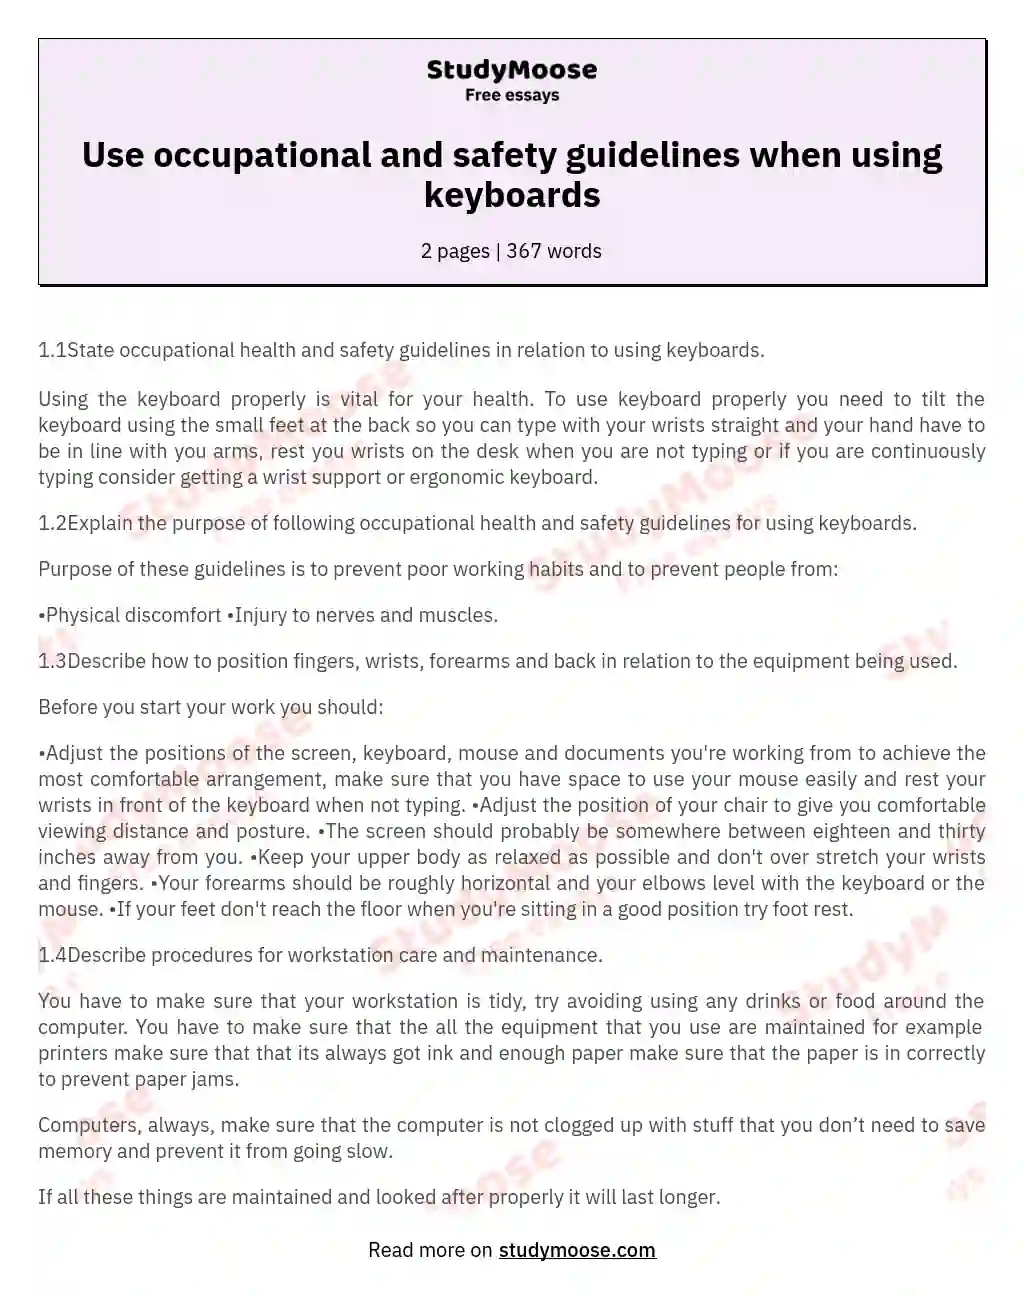 Use occupational and safety guidelines when using keyboards essay